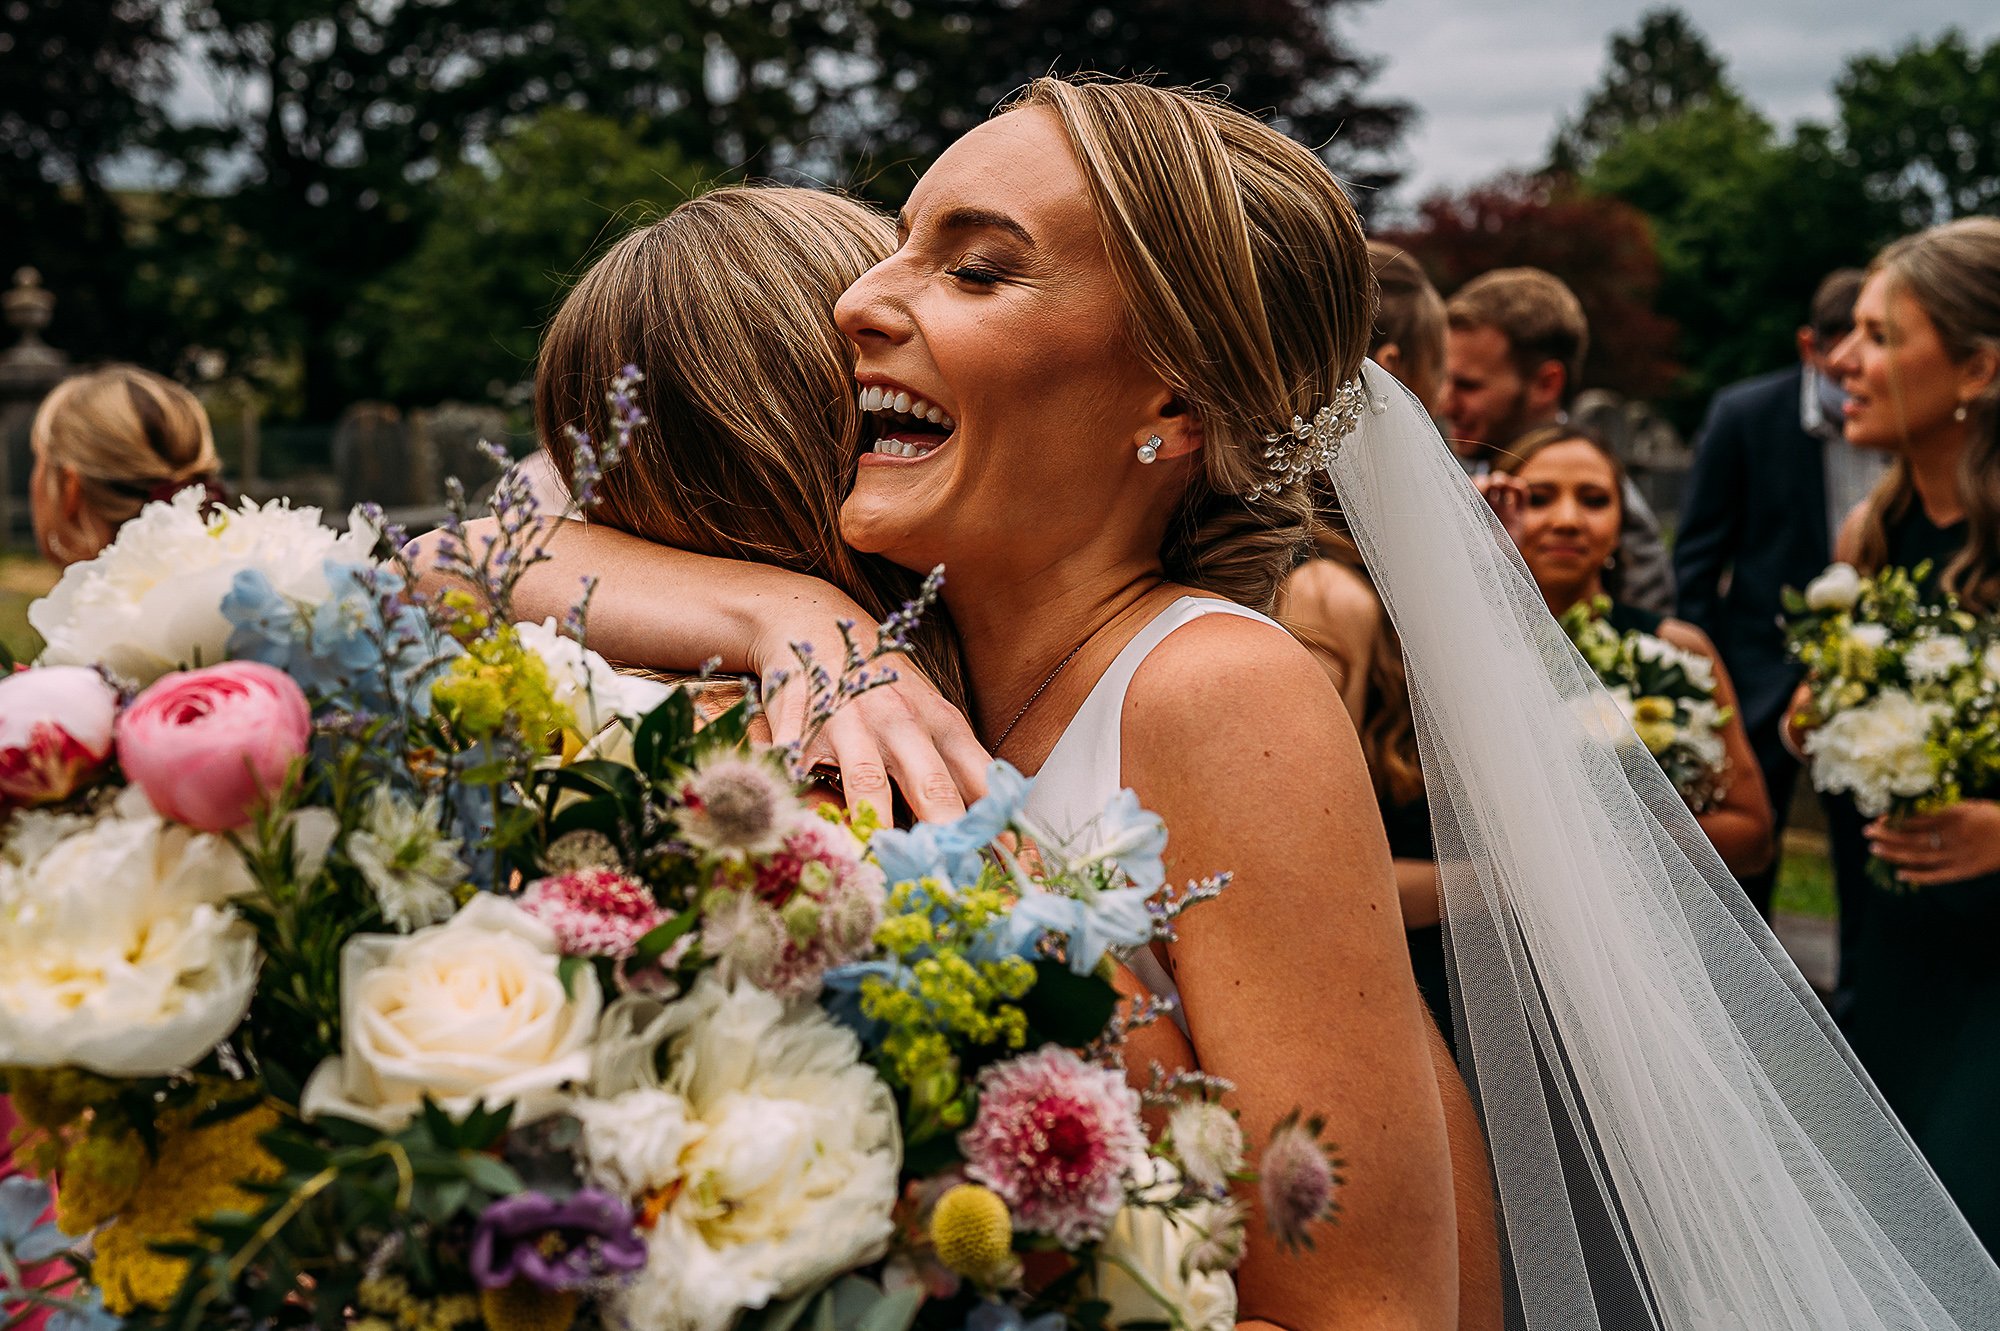  Bride hugs her friend after getting married. 